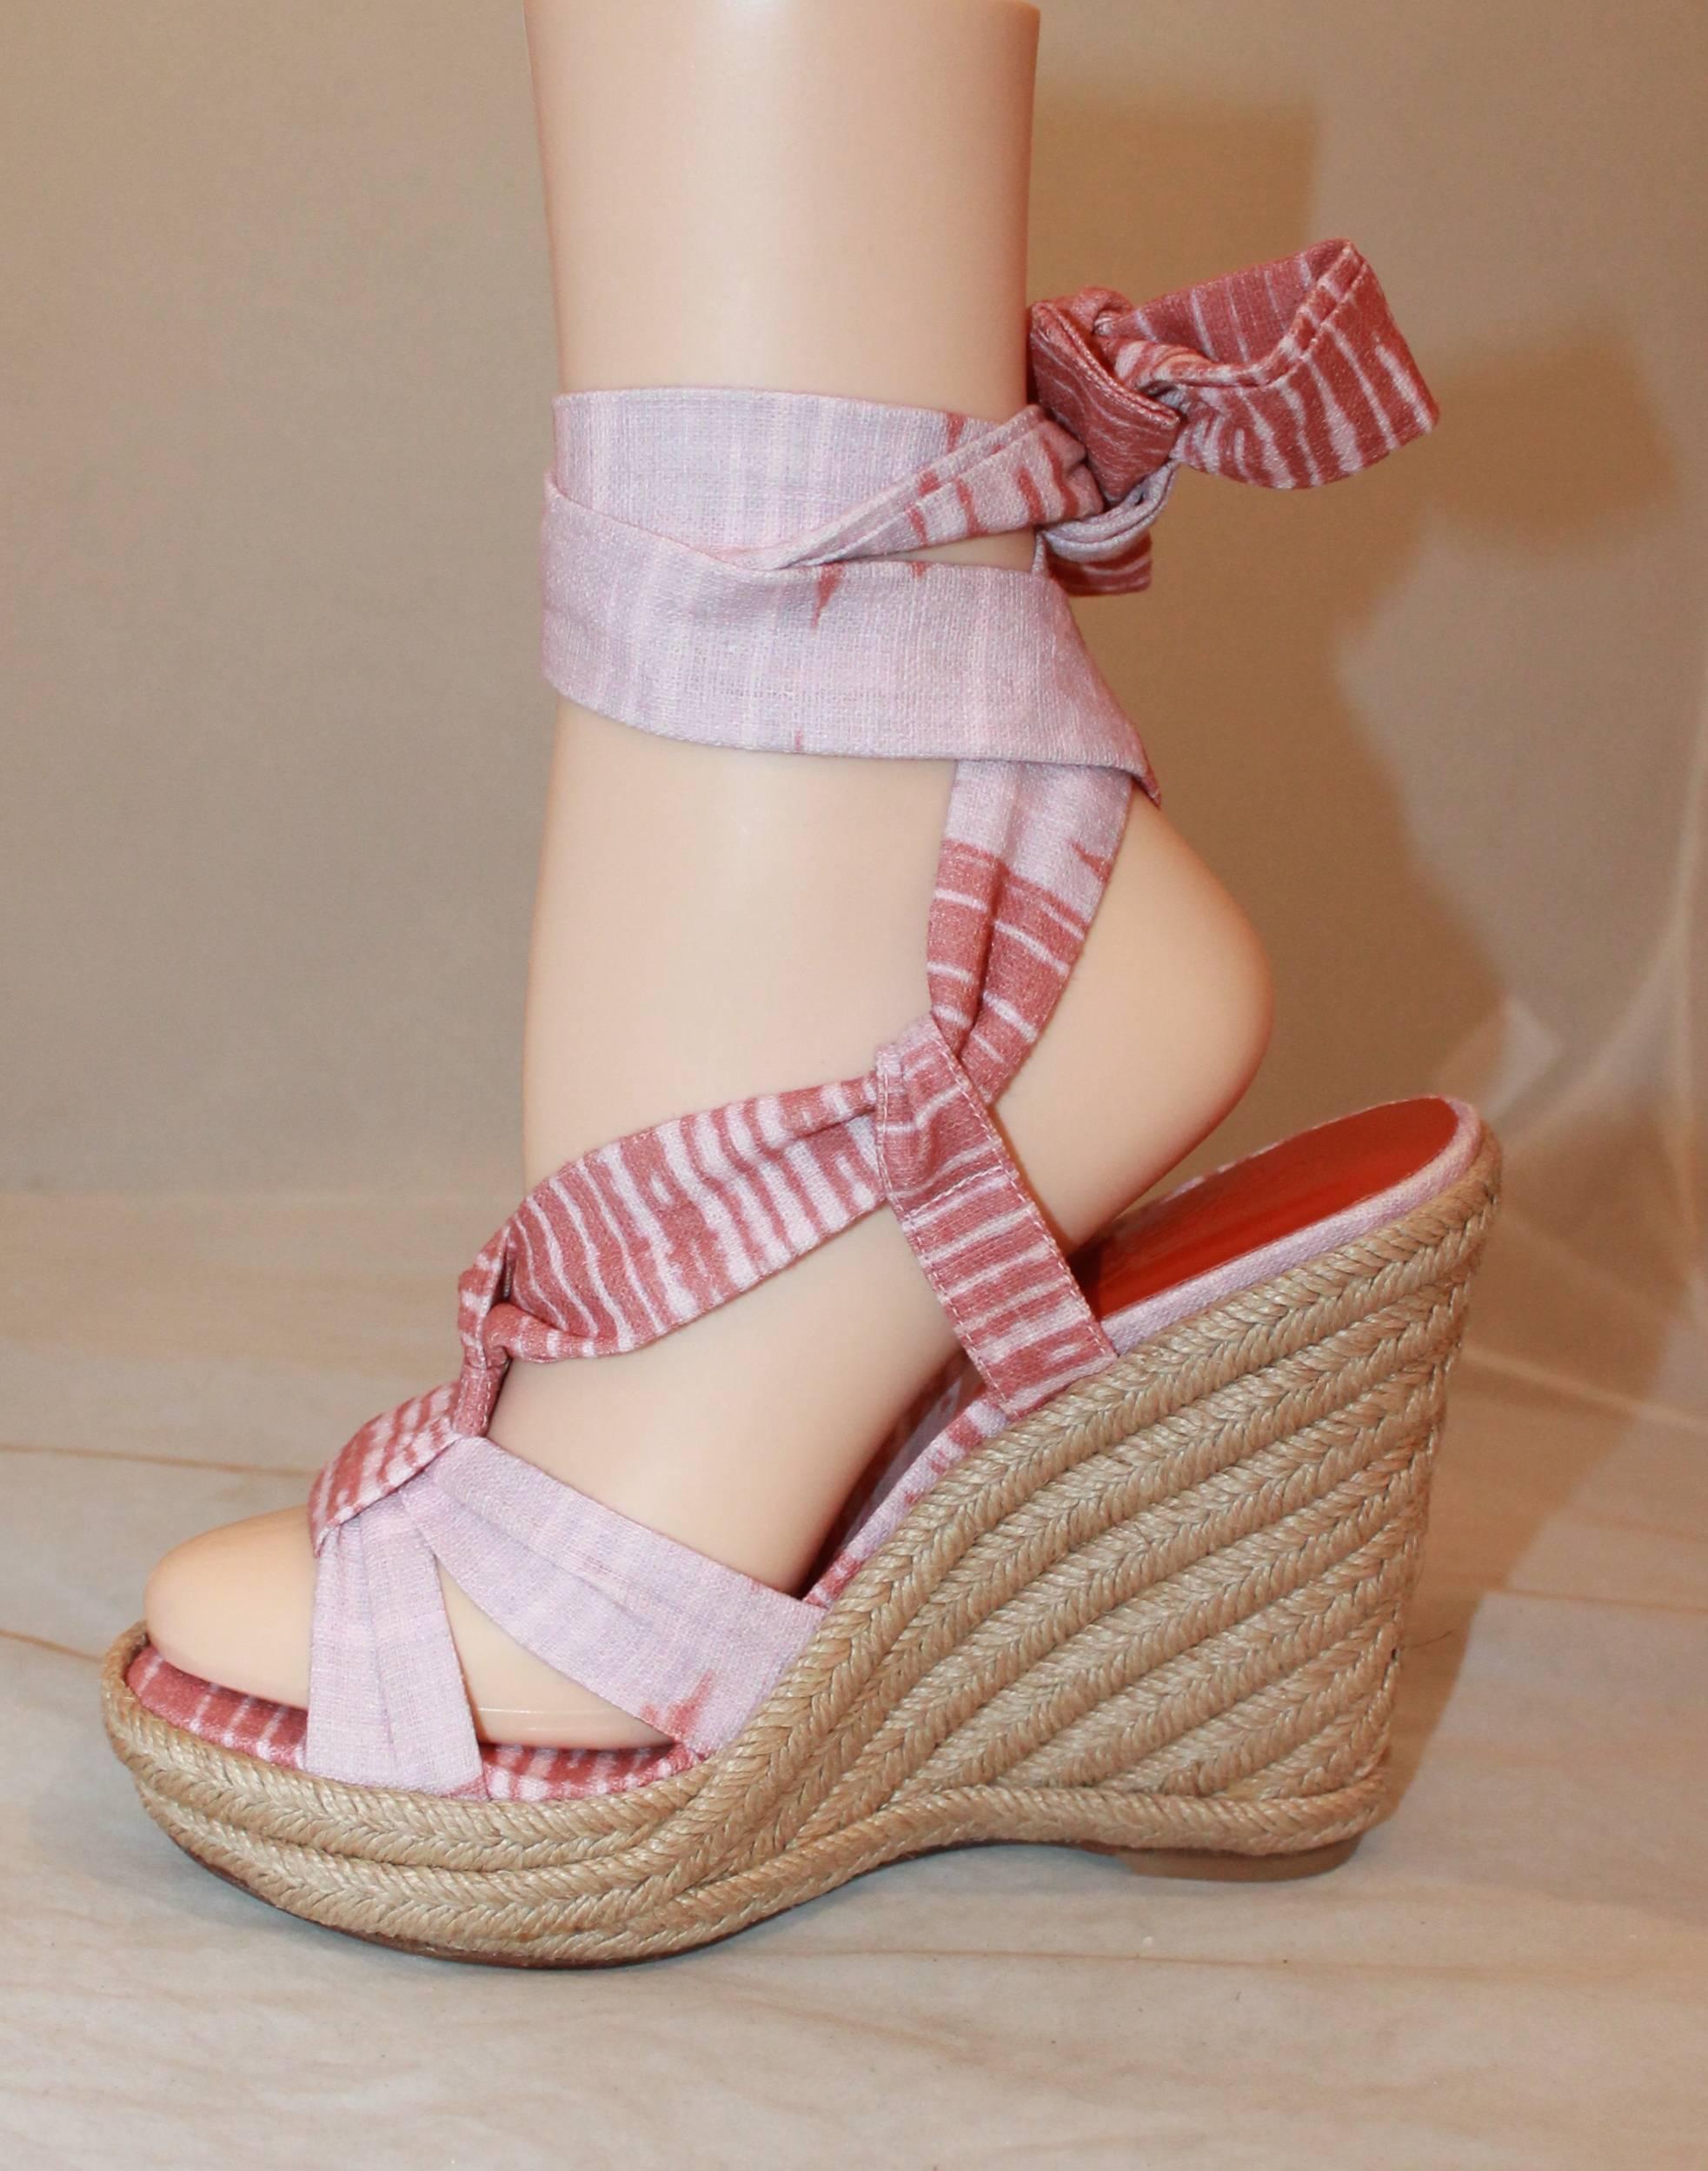 Stuart Weitzman Coral and Pink Canvas Printed Espadrille Tie-Up Wedges - 6.5. These printed wedges have a sole that was re-covered and feature pink and coral ribbon on the top of the shoe that tie up around the ankle. They are in new